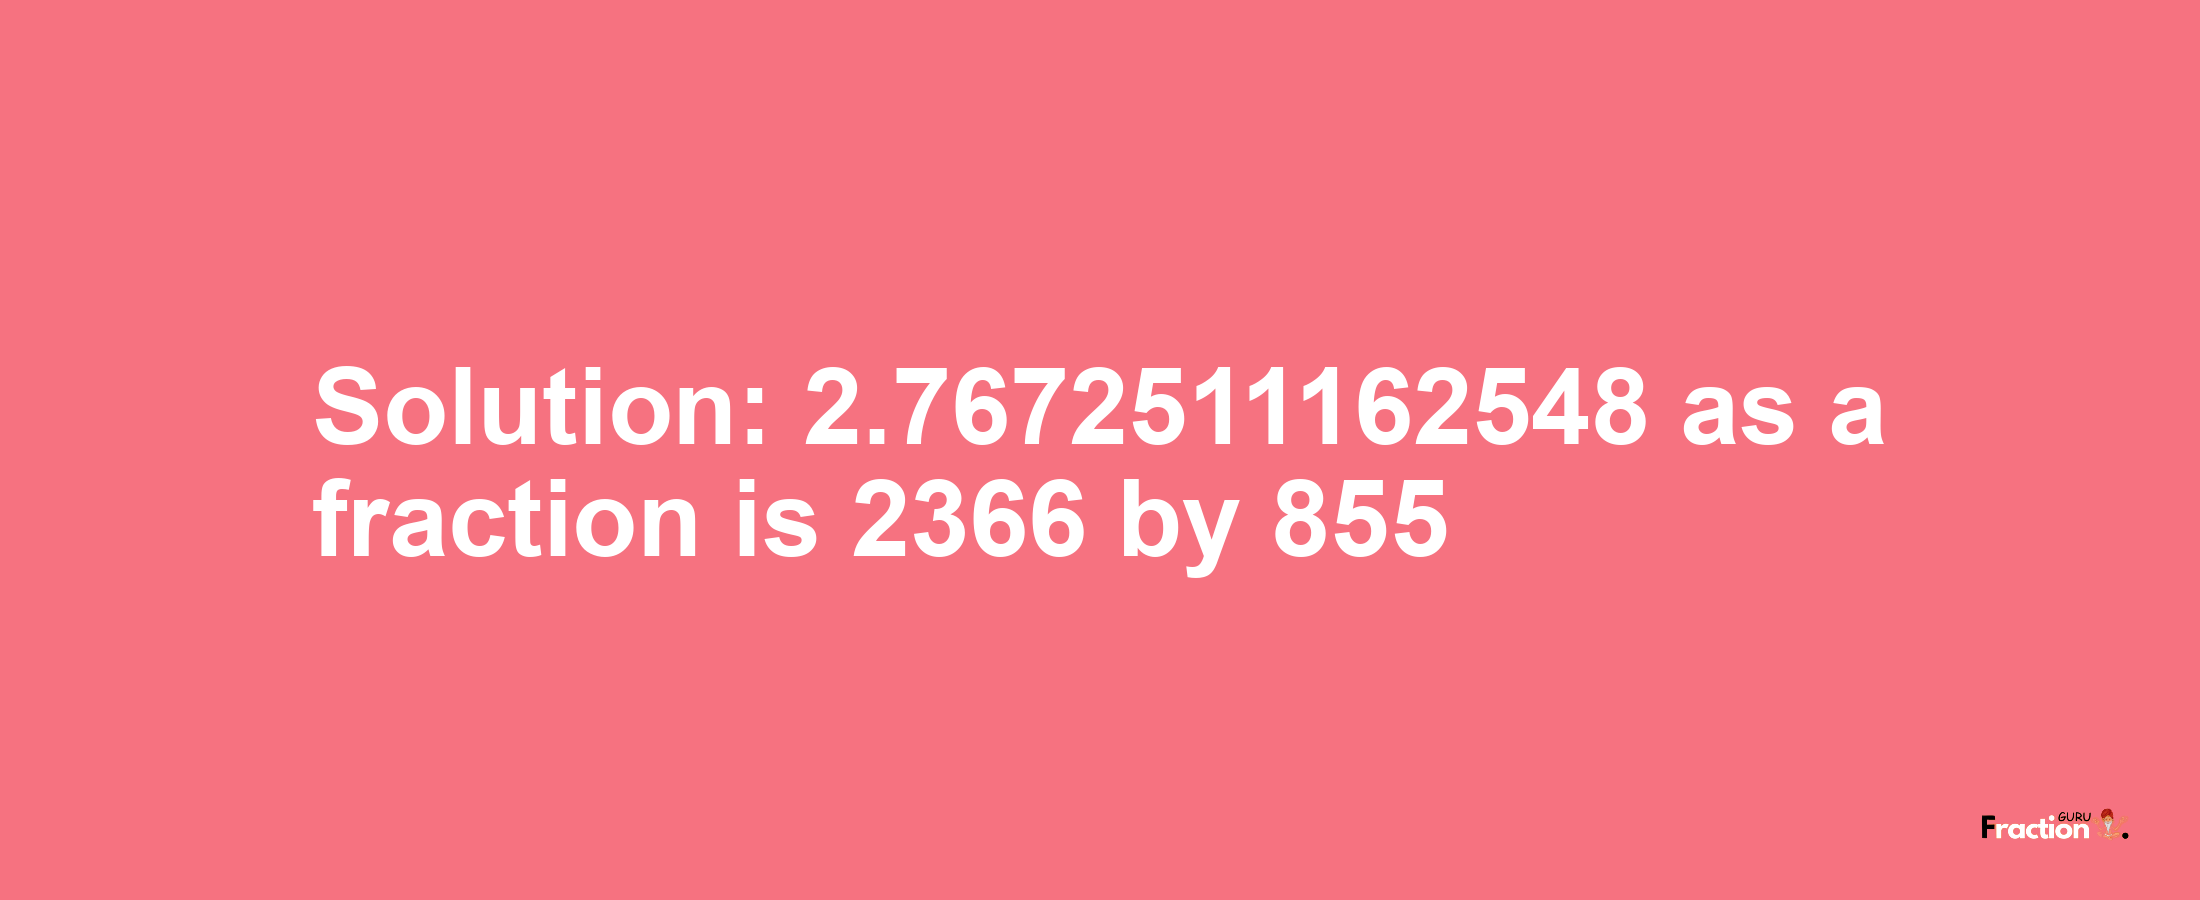 Solution:2.7672511162548 as a fraction is 2366/855